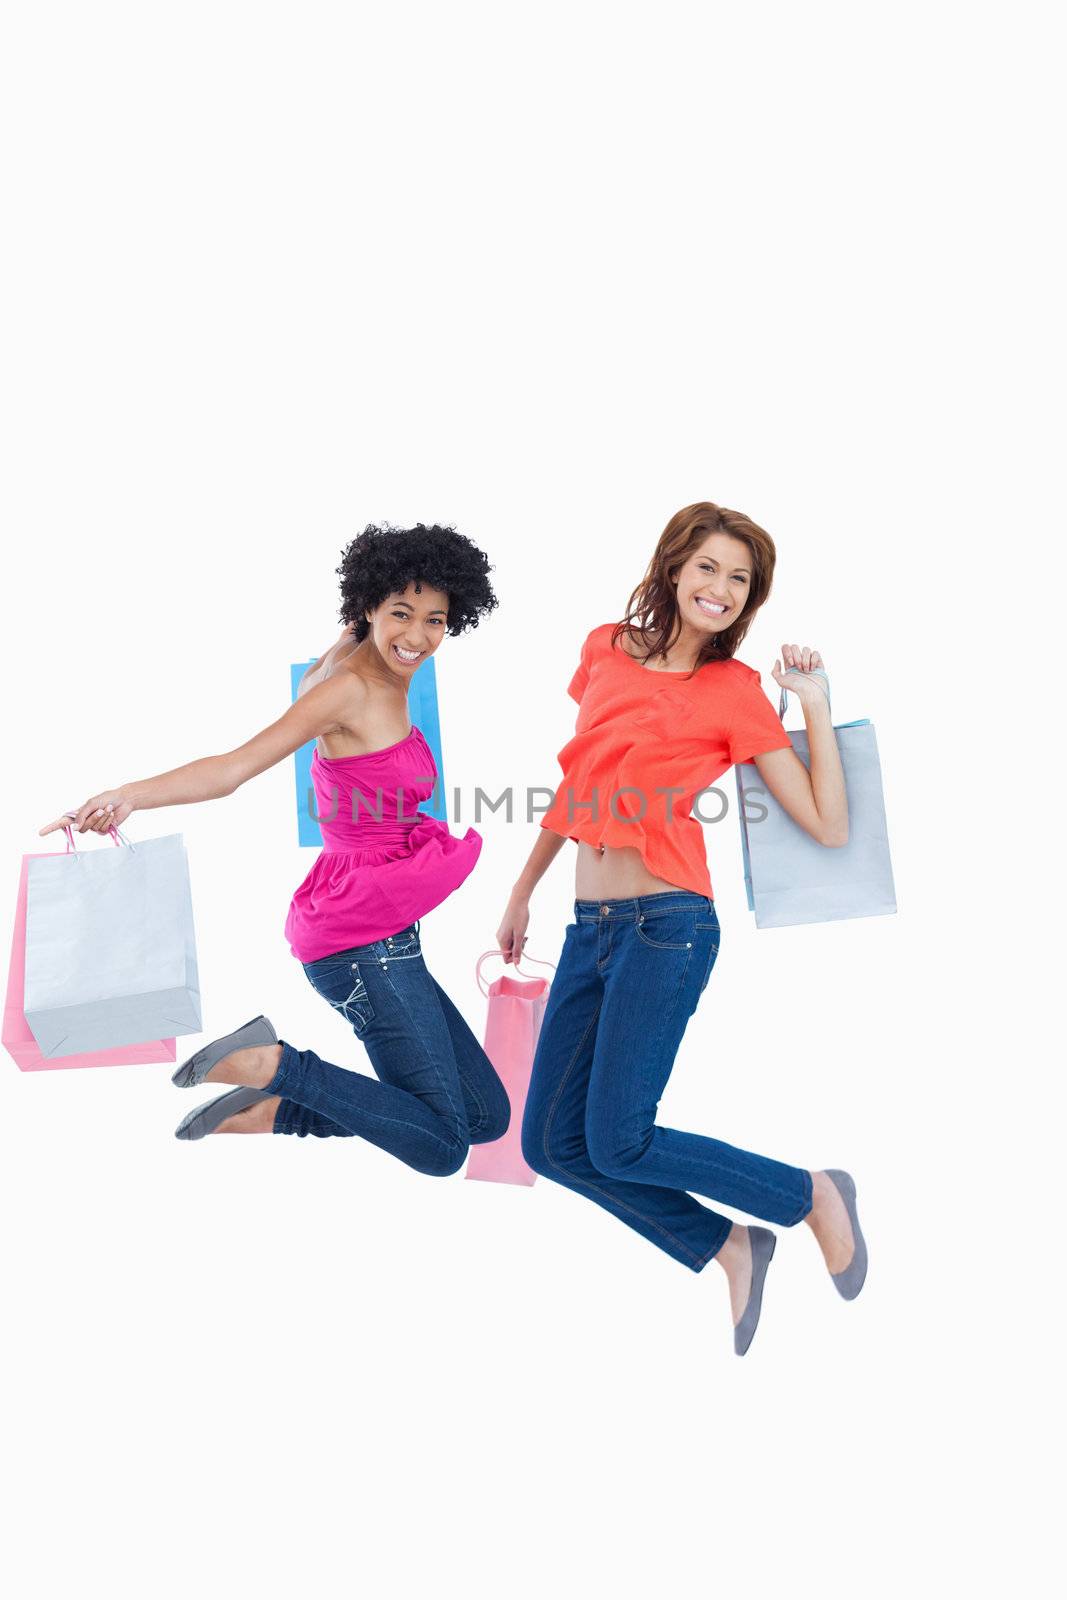 Dynamic teenagers energetically leaping after going shopping